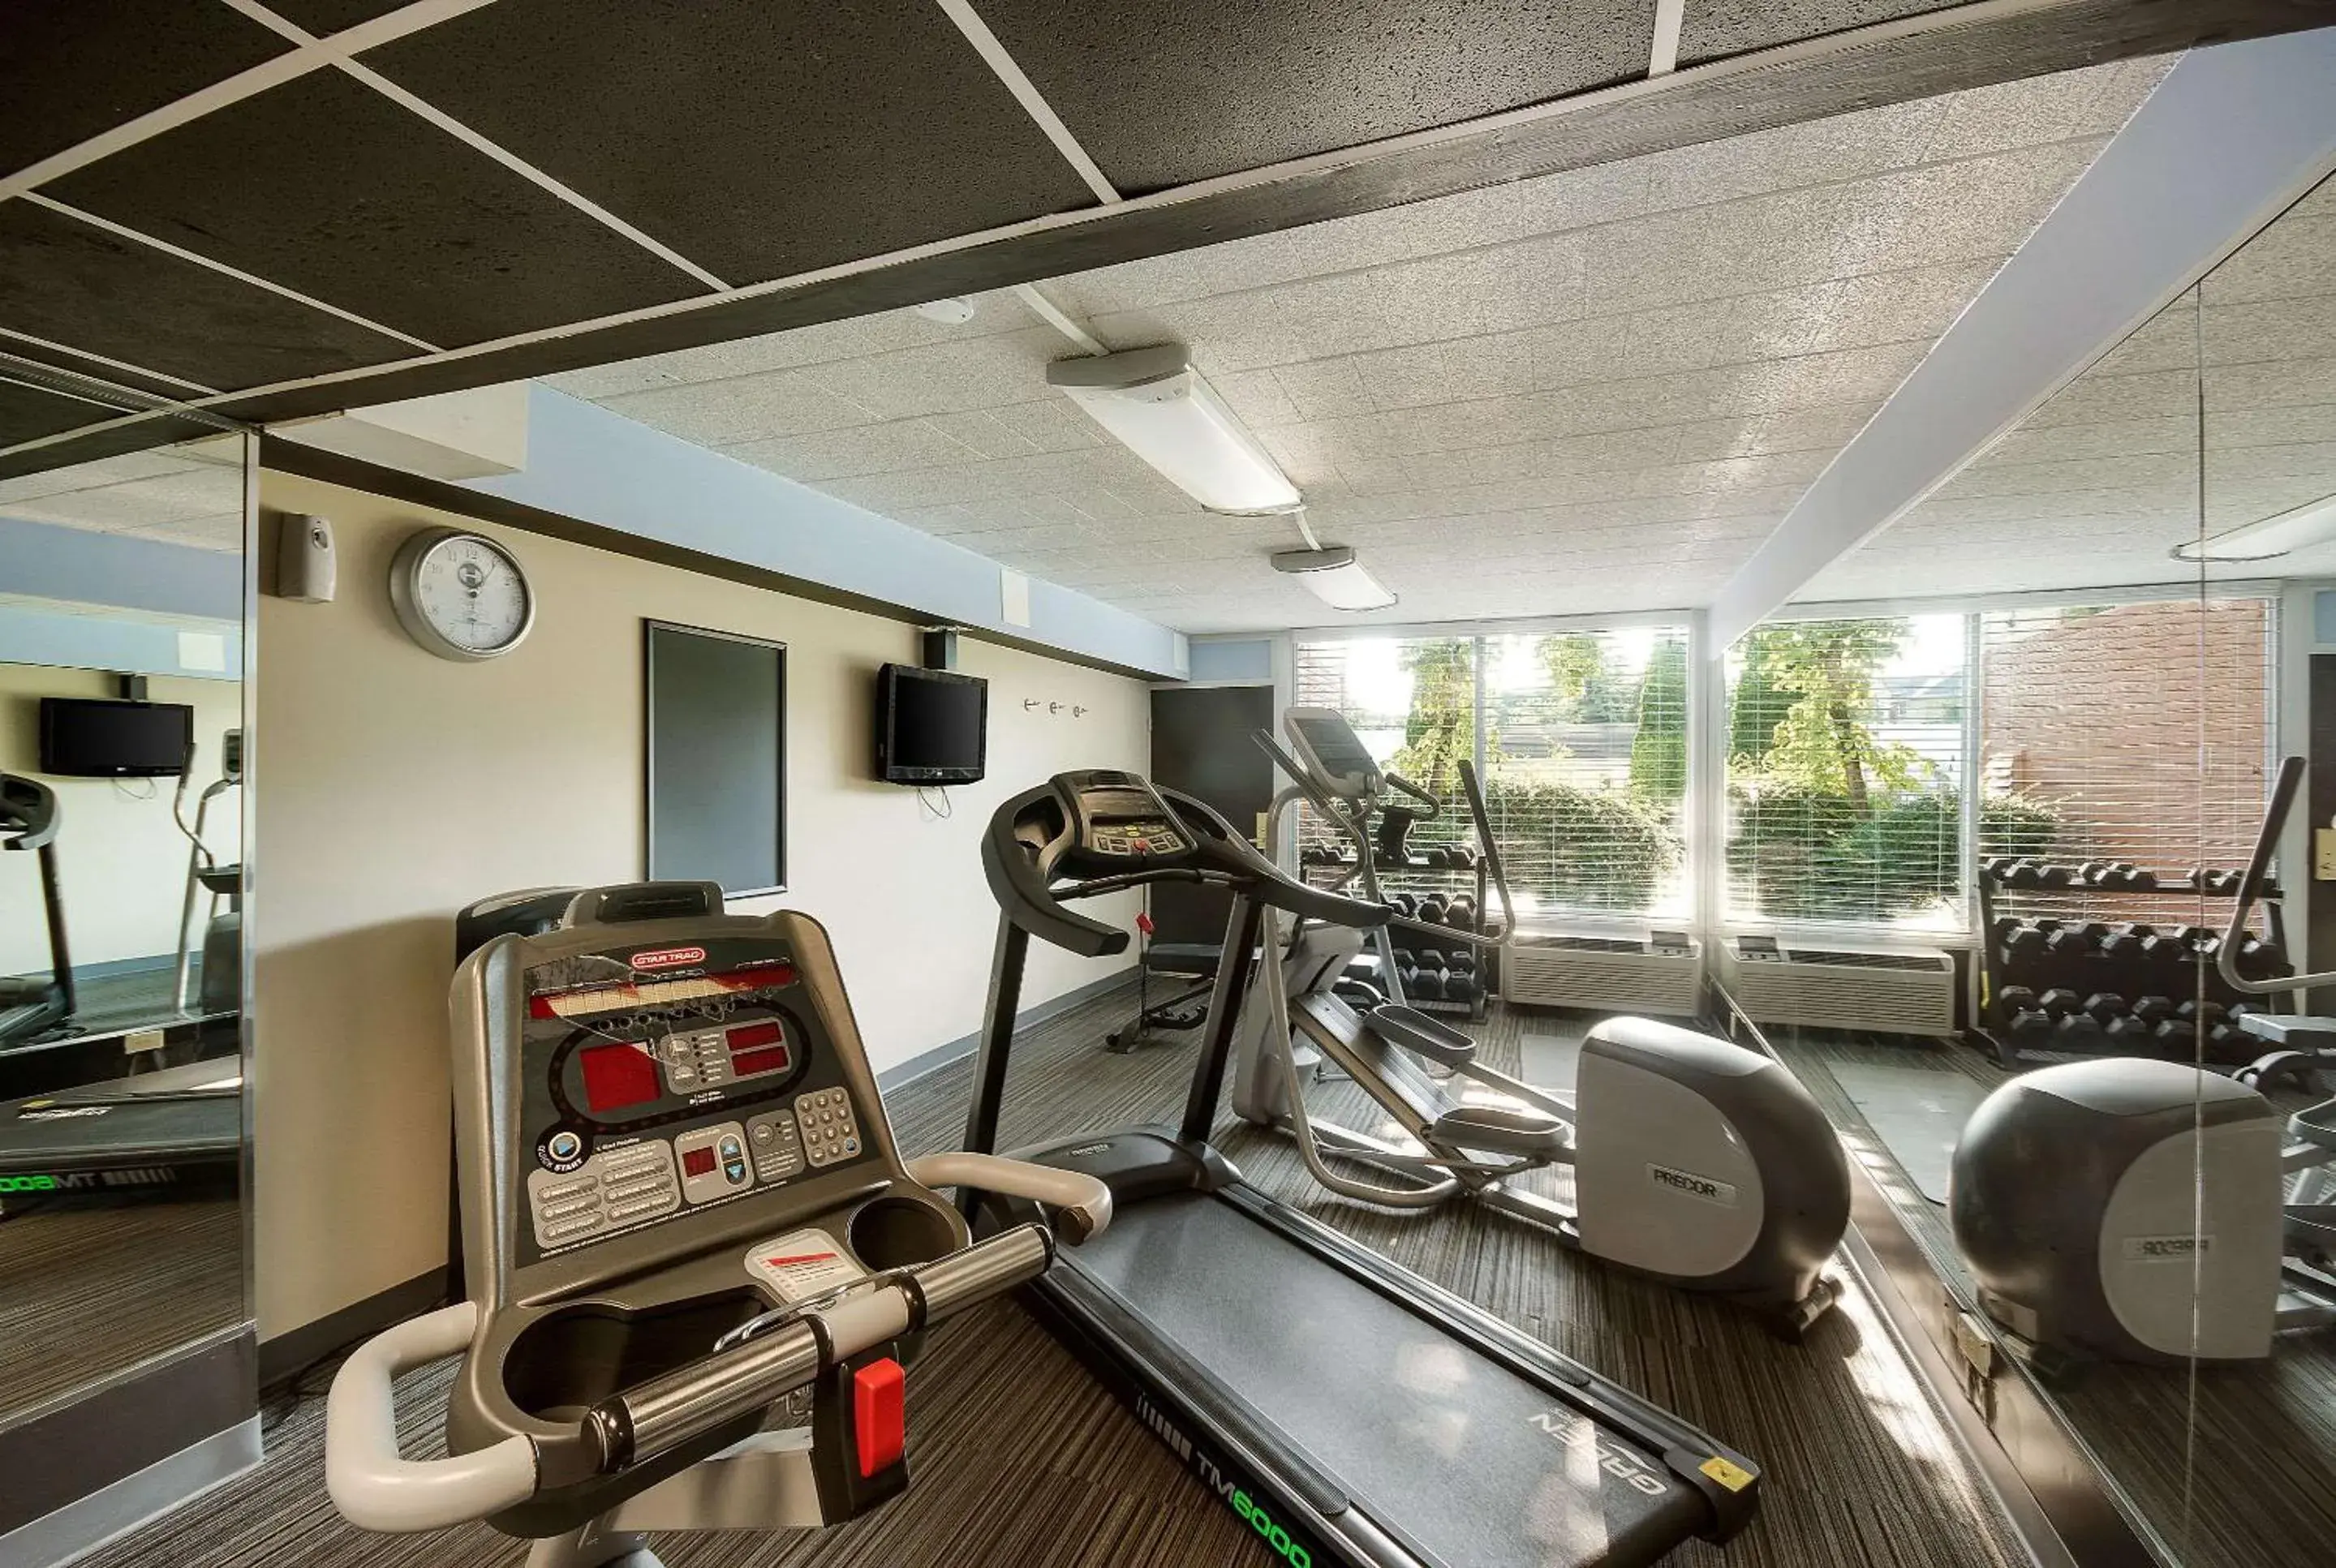 Activities, Fitness Center/Facilities in Exton Hotel and Conference Center